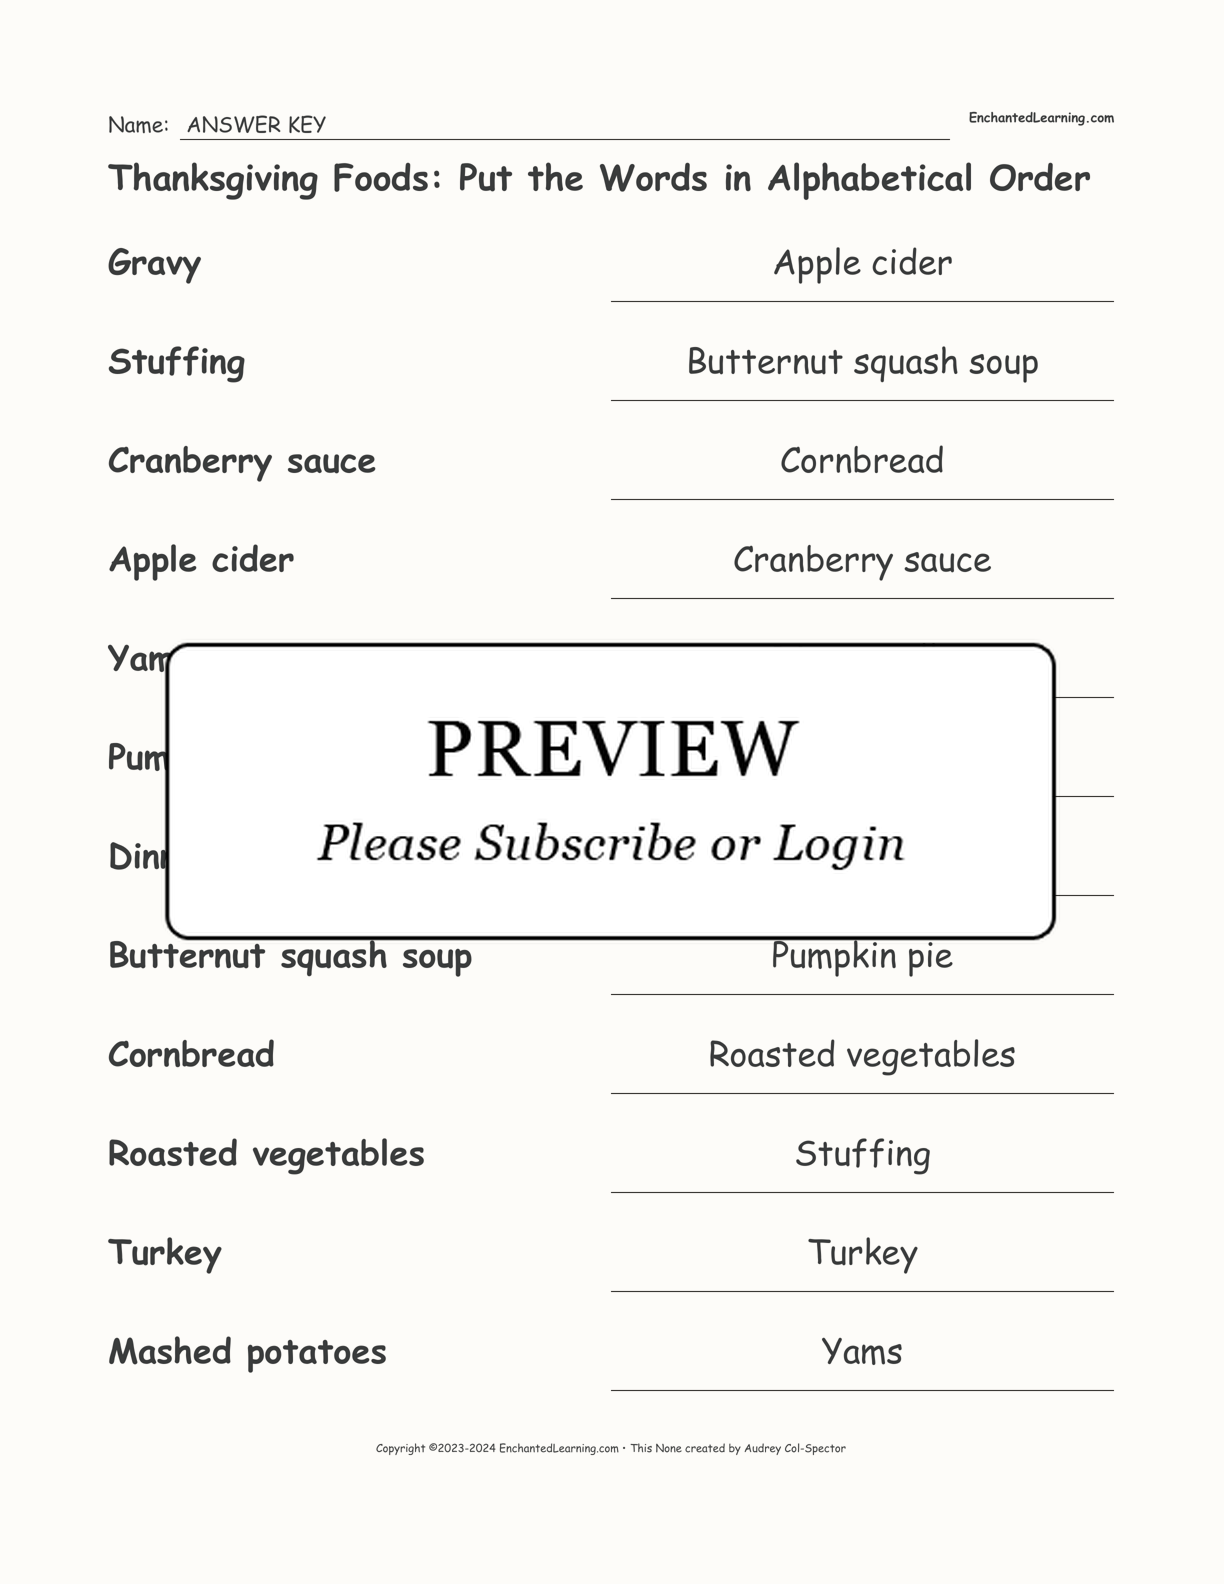 Thanksgiving Foods: Put the Words in Alphabetical Order interactive worksheet page 2